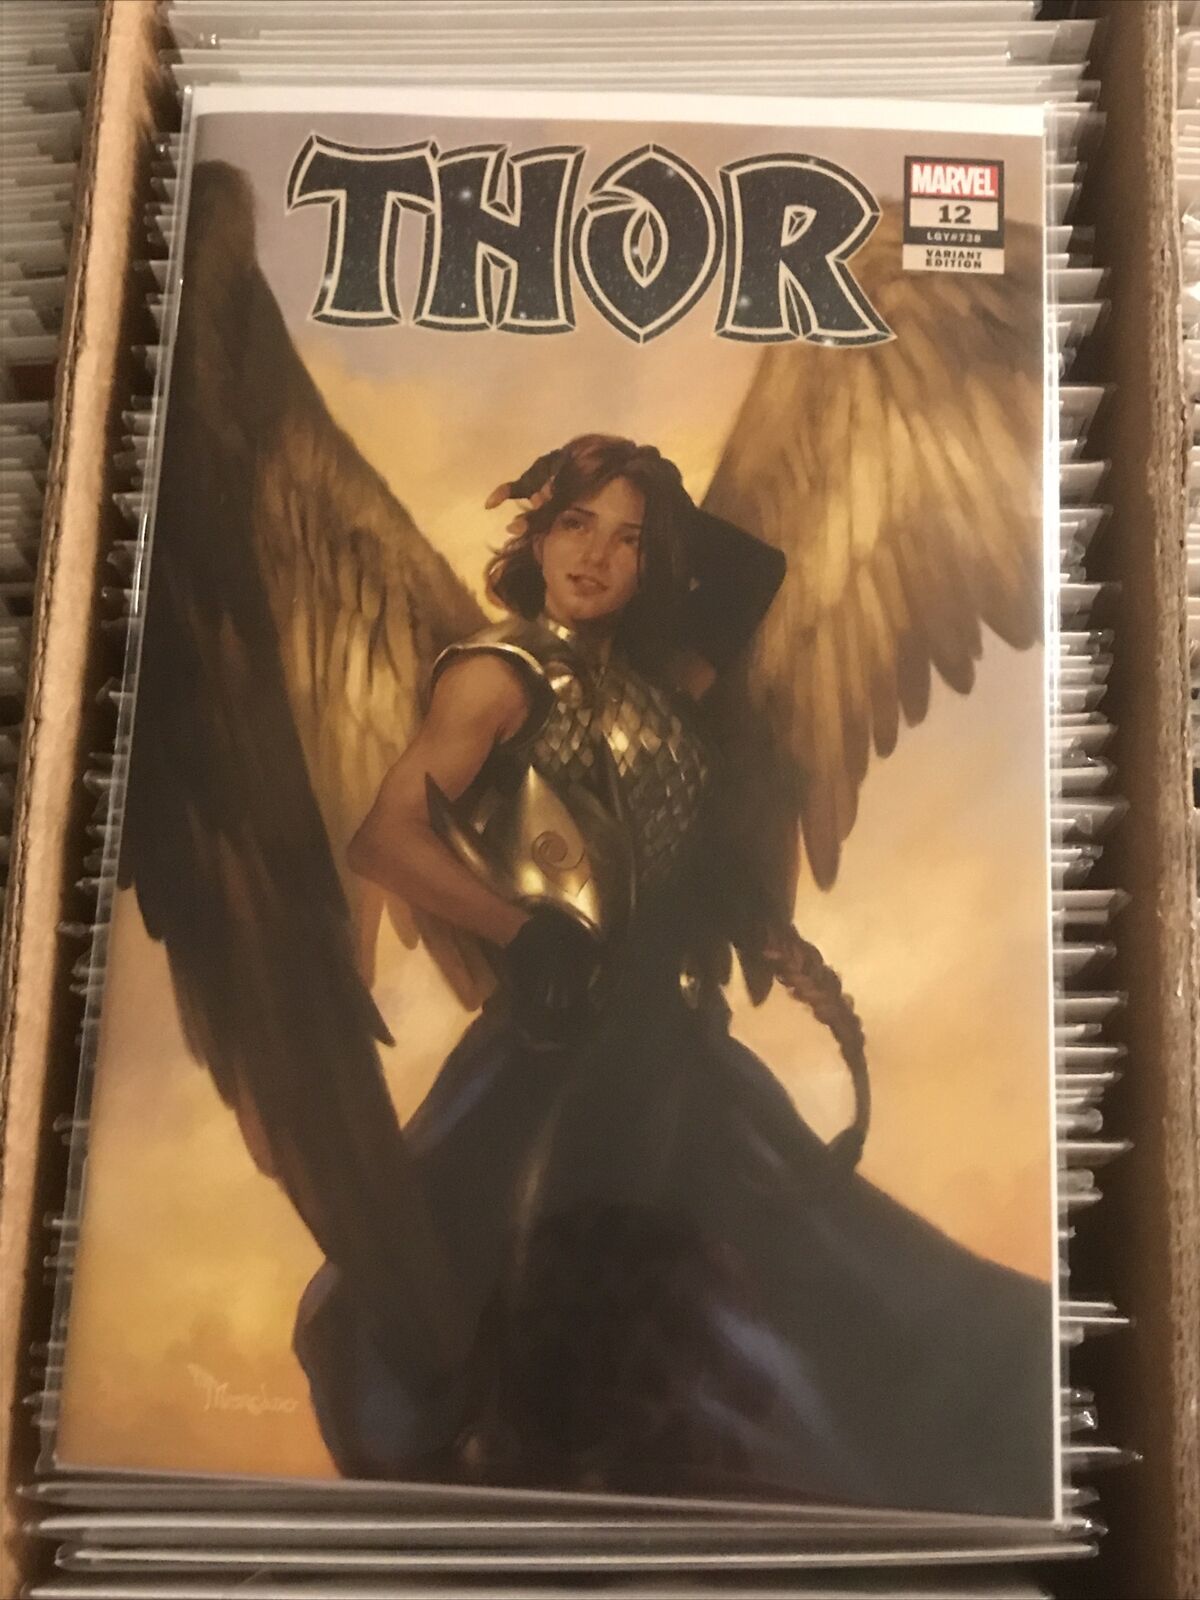 THOR #12 JANE FOSTER VALKYRIE MIGUEL MERCADO TRADE DRESS VARIANT COVER 2021 